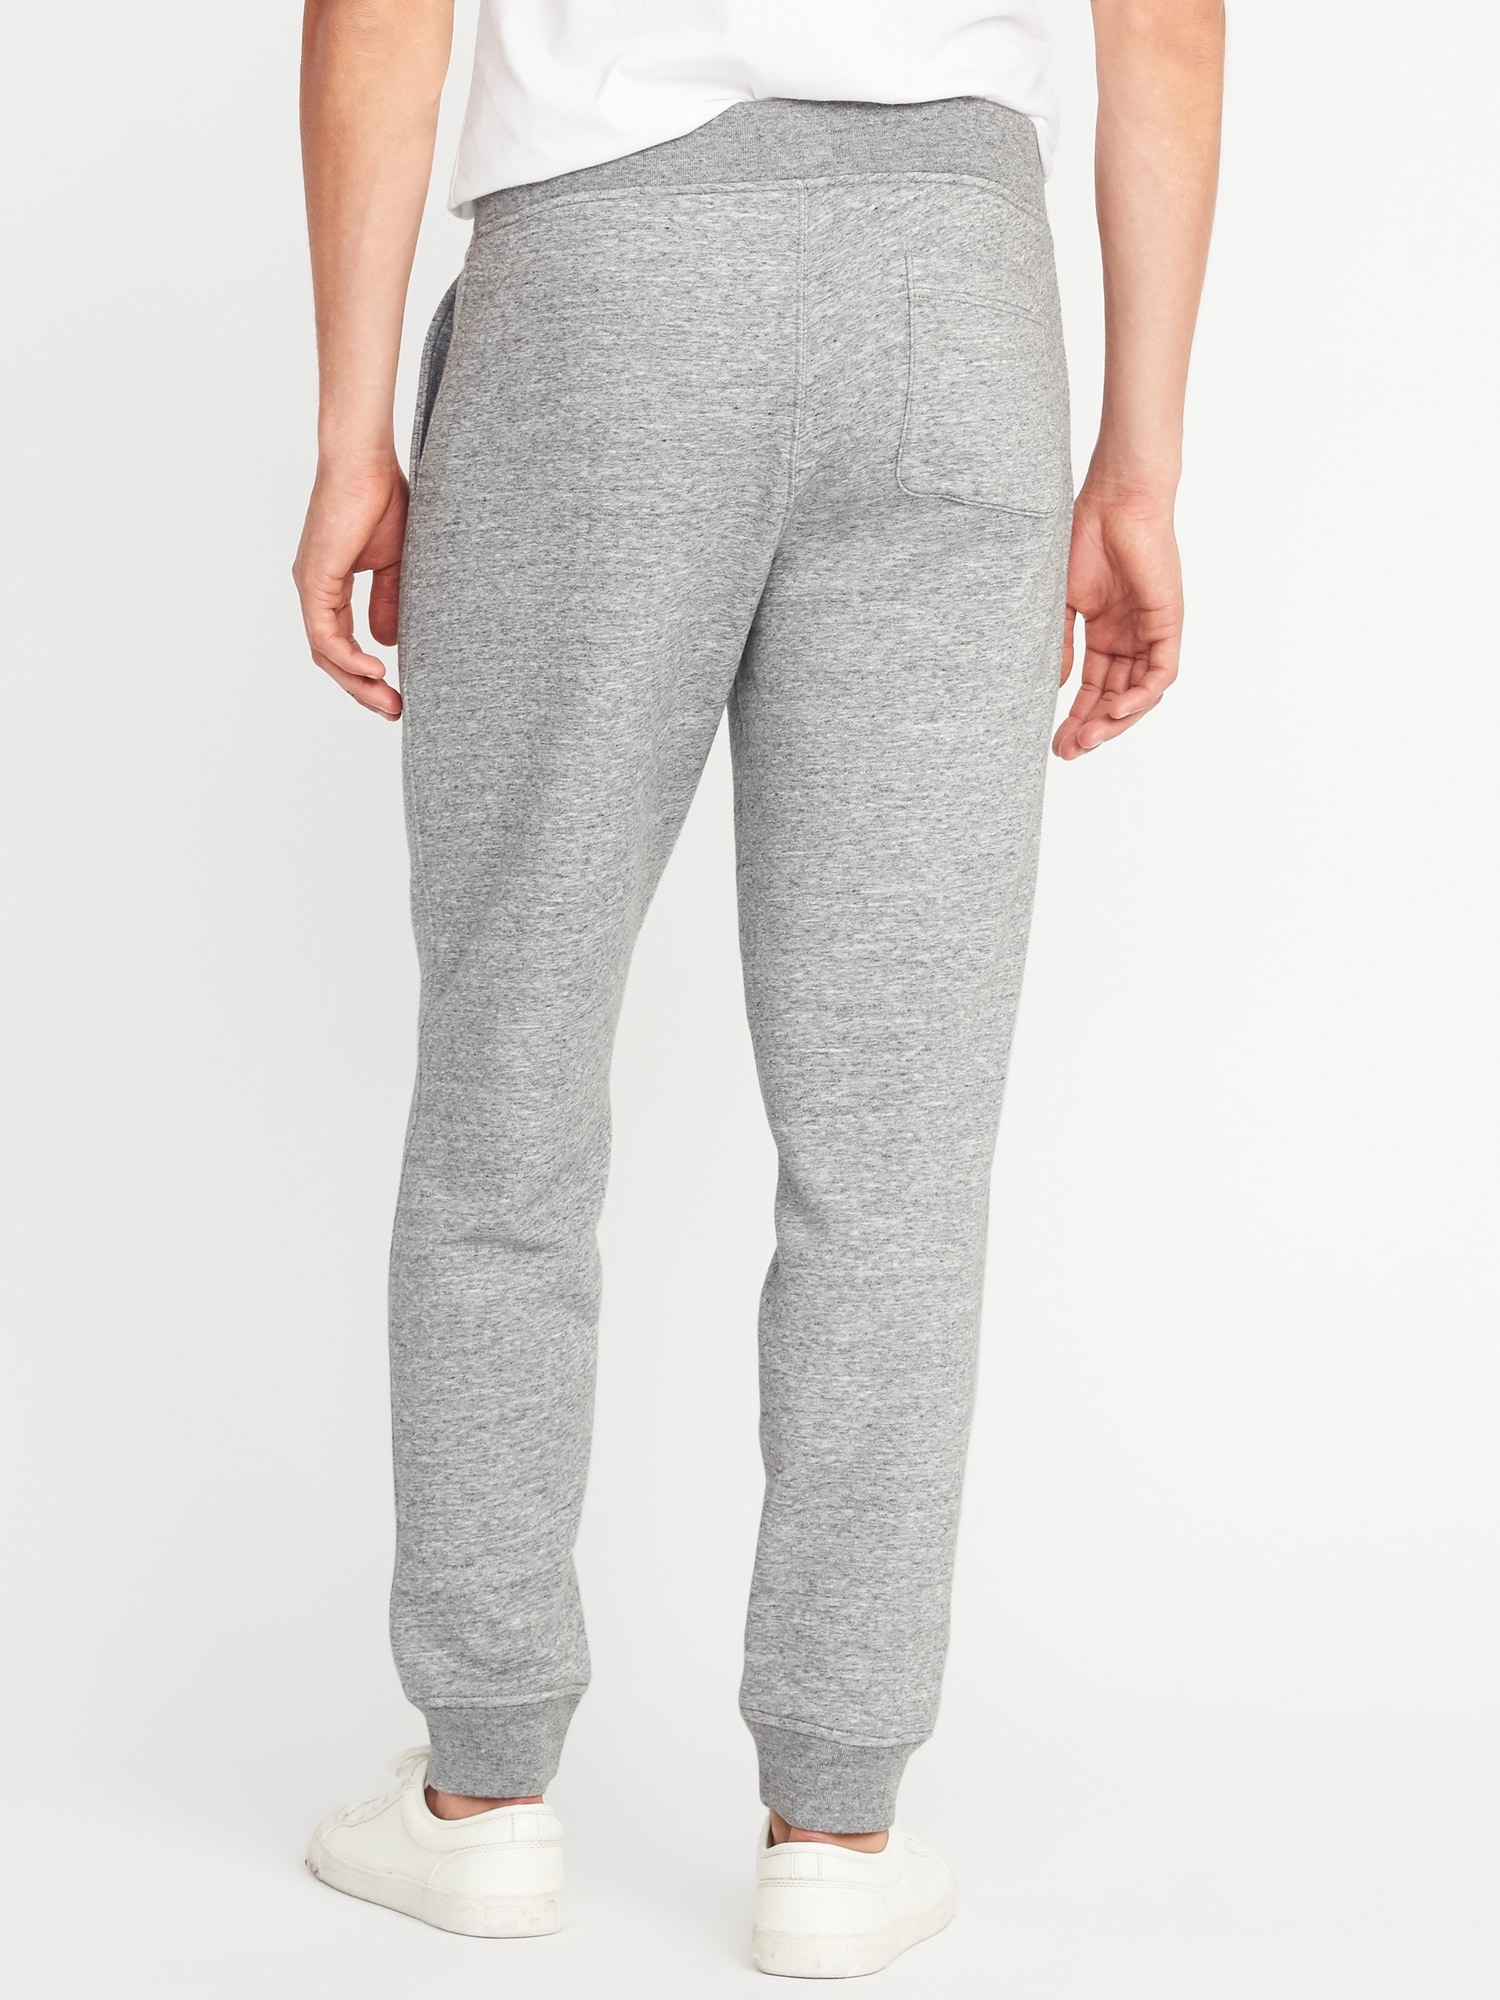 Tapered Street Jogger Sweatpants for Men | Old Navy